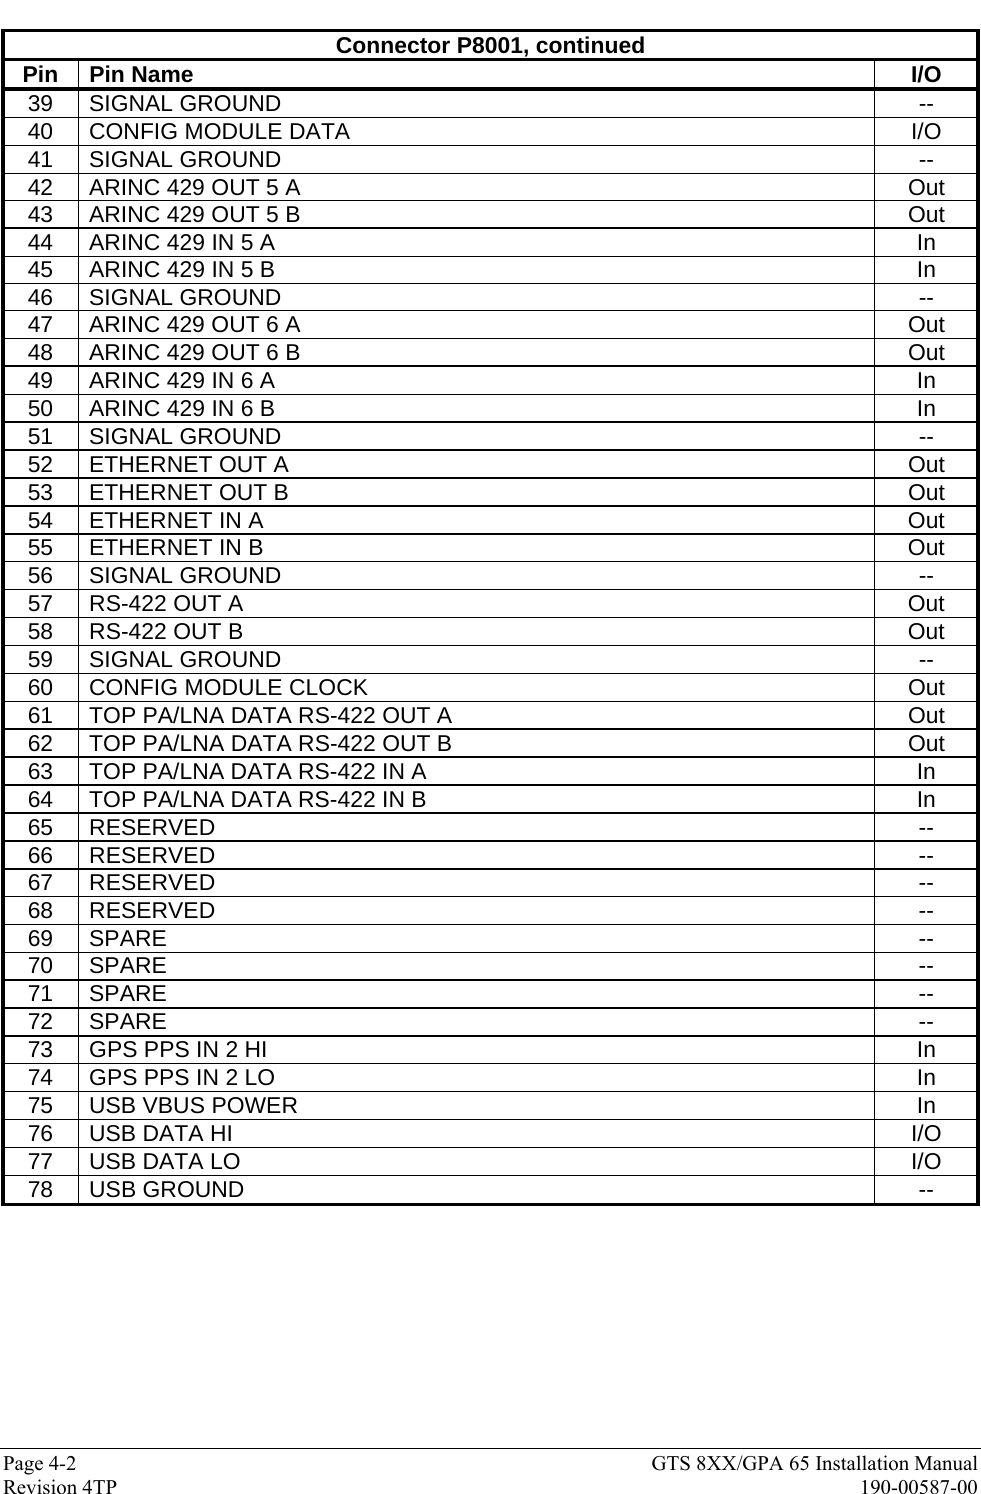  Page 4-2  GTS 8XX/GPA 65 Installation Manual Revision 4TP  190-00587-00 Connector P8001, continued Pin Pin Name  I/O 39 SIGNAL GROUND  -- 40 CONFIG MODULE DATA  I/O 41 SIGNAL GROUND  -- 42  ARINC 429 OUT 5 A  Out 43  ARINC 429 OUT 5 B  Out 44  ARINC 429 IN 5 A  In 45  ARINC 429 IN 5 B  In 46 SIGNAL GROUND  -- 47  ARINC 429 OUT 6 A  Out 48  ARINC 429 OUT 6 B  Out 49  ARINC 429 IN 6 A  In 50  ARINC 429 IN 6 B  In 51 SIGNAL GROUND  -- 52  ETHERNET OUT A  Out 53  ETHERNET OUT B  Out 54  ETHERNET IN A  Out 55  ETHERNET IN B  Out 56 SIGNAL GROUND  -- 57  RS-422 OUT A  Out 58  RS-422 OUT B  Out 59 SIGNAL GROUND  -- 60 CONFIG MODULE CLOCK  Out 61  TOP PA/LNA DATA RS-422 OUT A  Out 62  TOP PA/LNA DATA RS-422 OUT B  Out 63  TOP PA/LNA DATA RS-422 IN A  In 64  TOP PA/LNA DATA RS-422 IN B  In 65 RESERVED  -- 66 RESERVED  -- 67 RESERVED  -- 68 RESERVED  -- 69 SPARE  -- 70 SPARE  -- 71 SPARE  -- 72 SPARE  -- 73  GPS PPS IN 2 HI  In 74  GPS PPS IN 2 LO  In 75 USB VBUS POWER  In 76 USB DATA HI  I/O 77 USB DATA LO  I/O 78 USB GROUND  --  